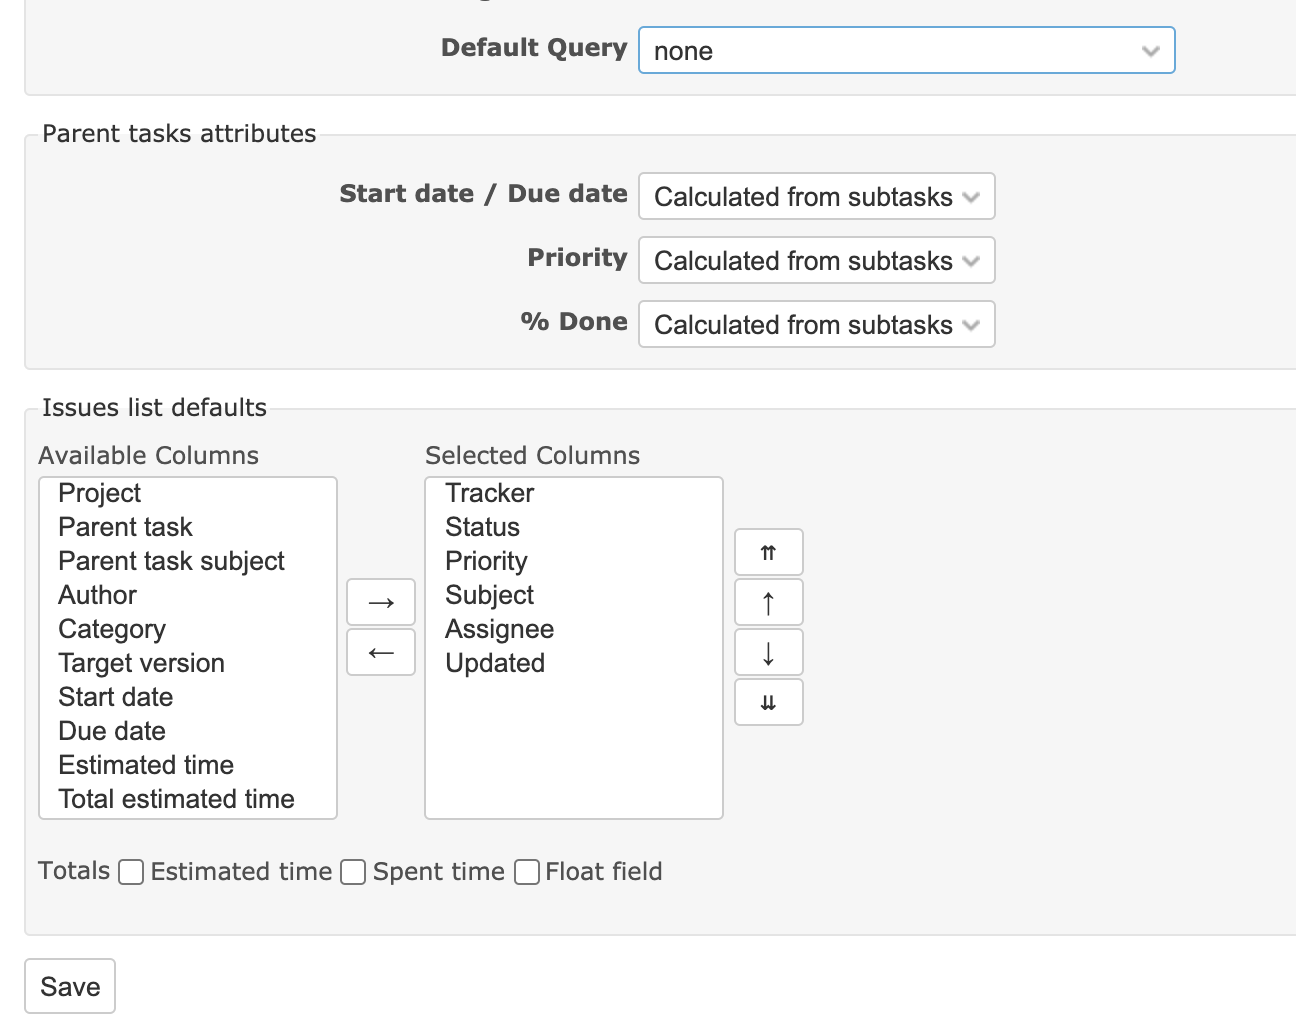 Default query issues list defaults section